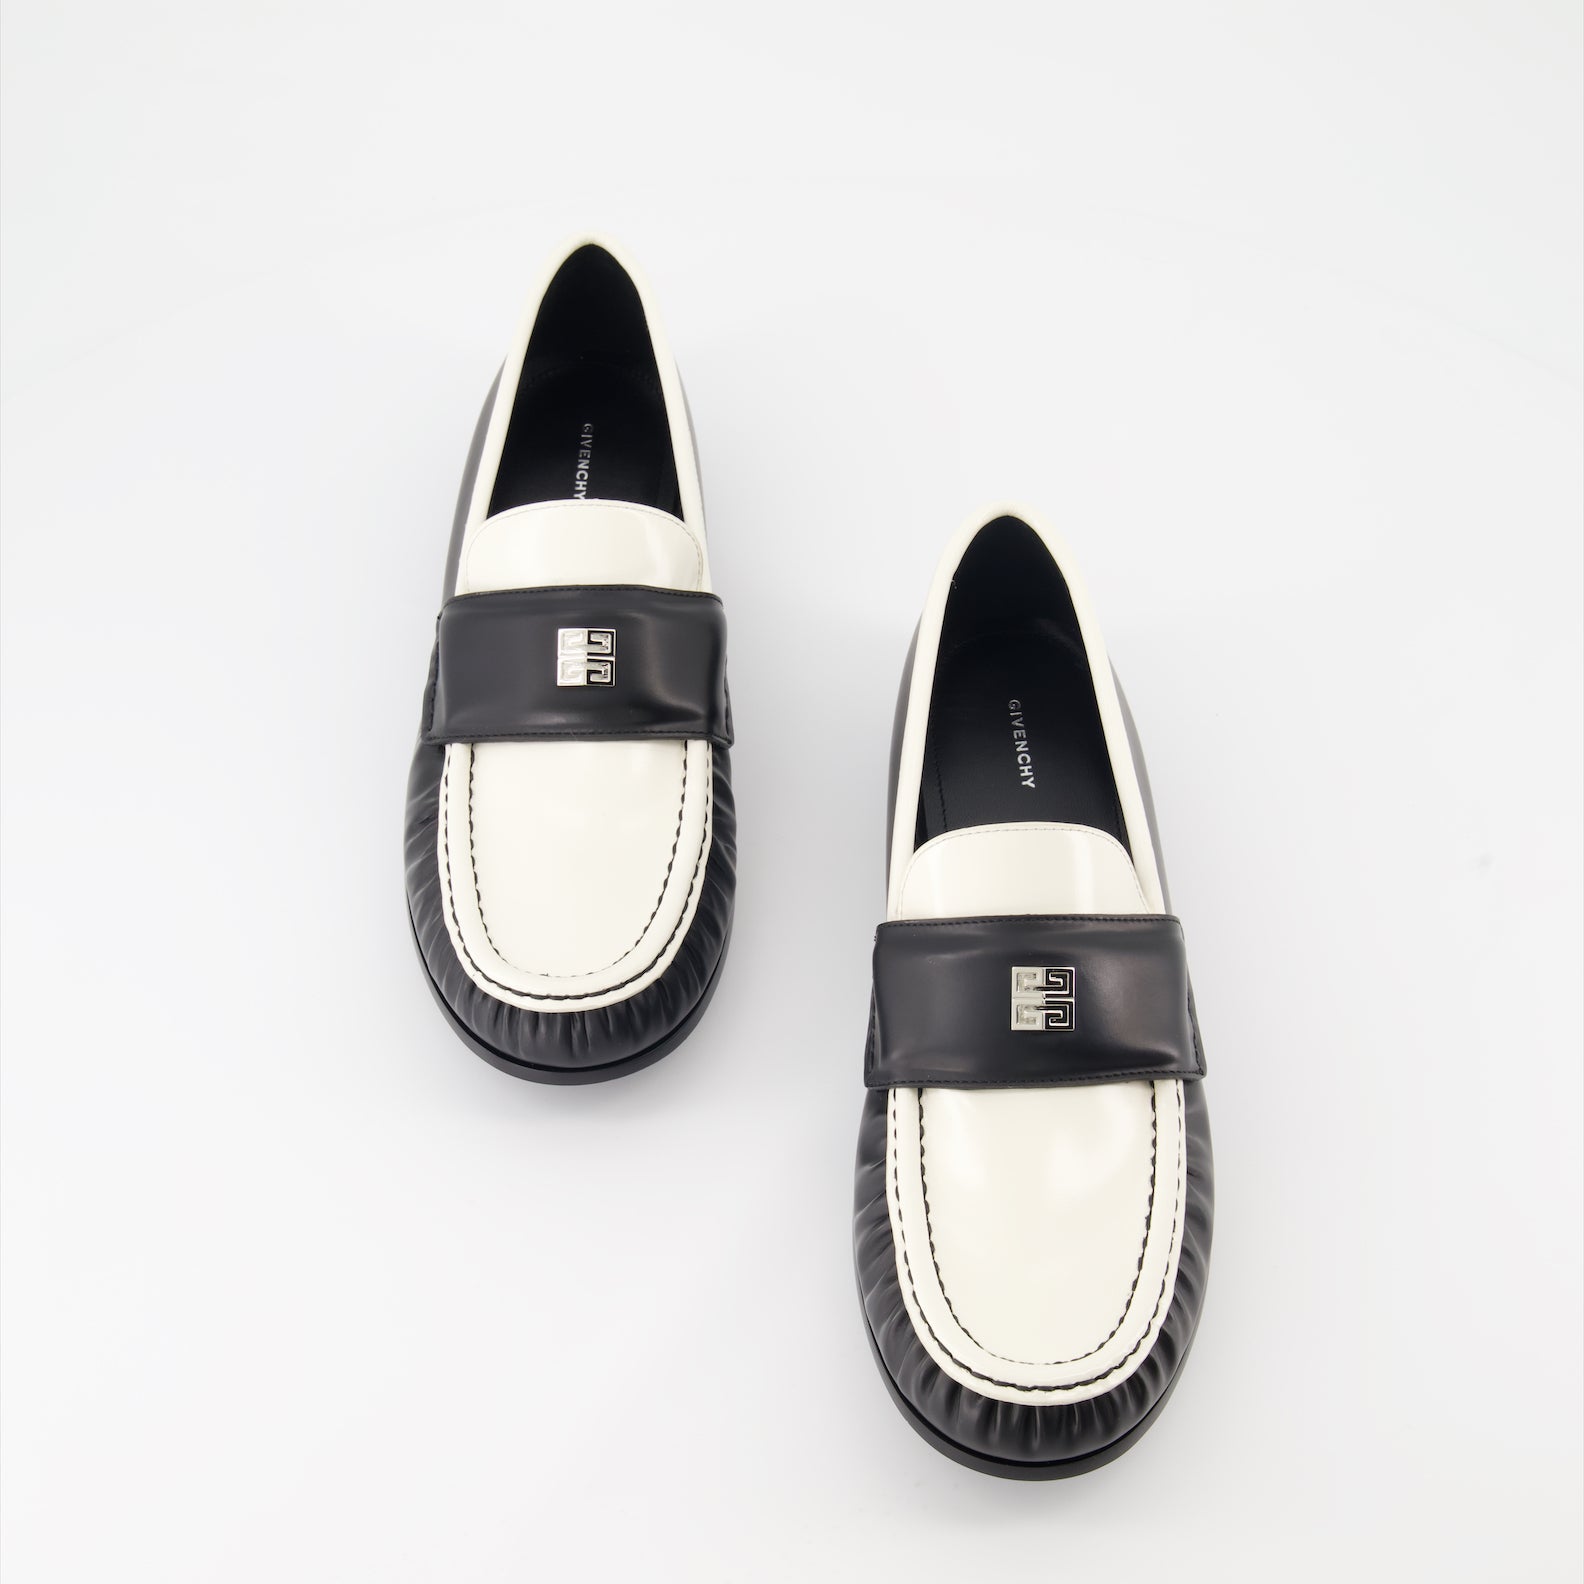 4G leather moccasins